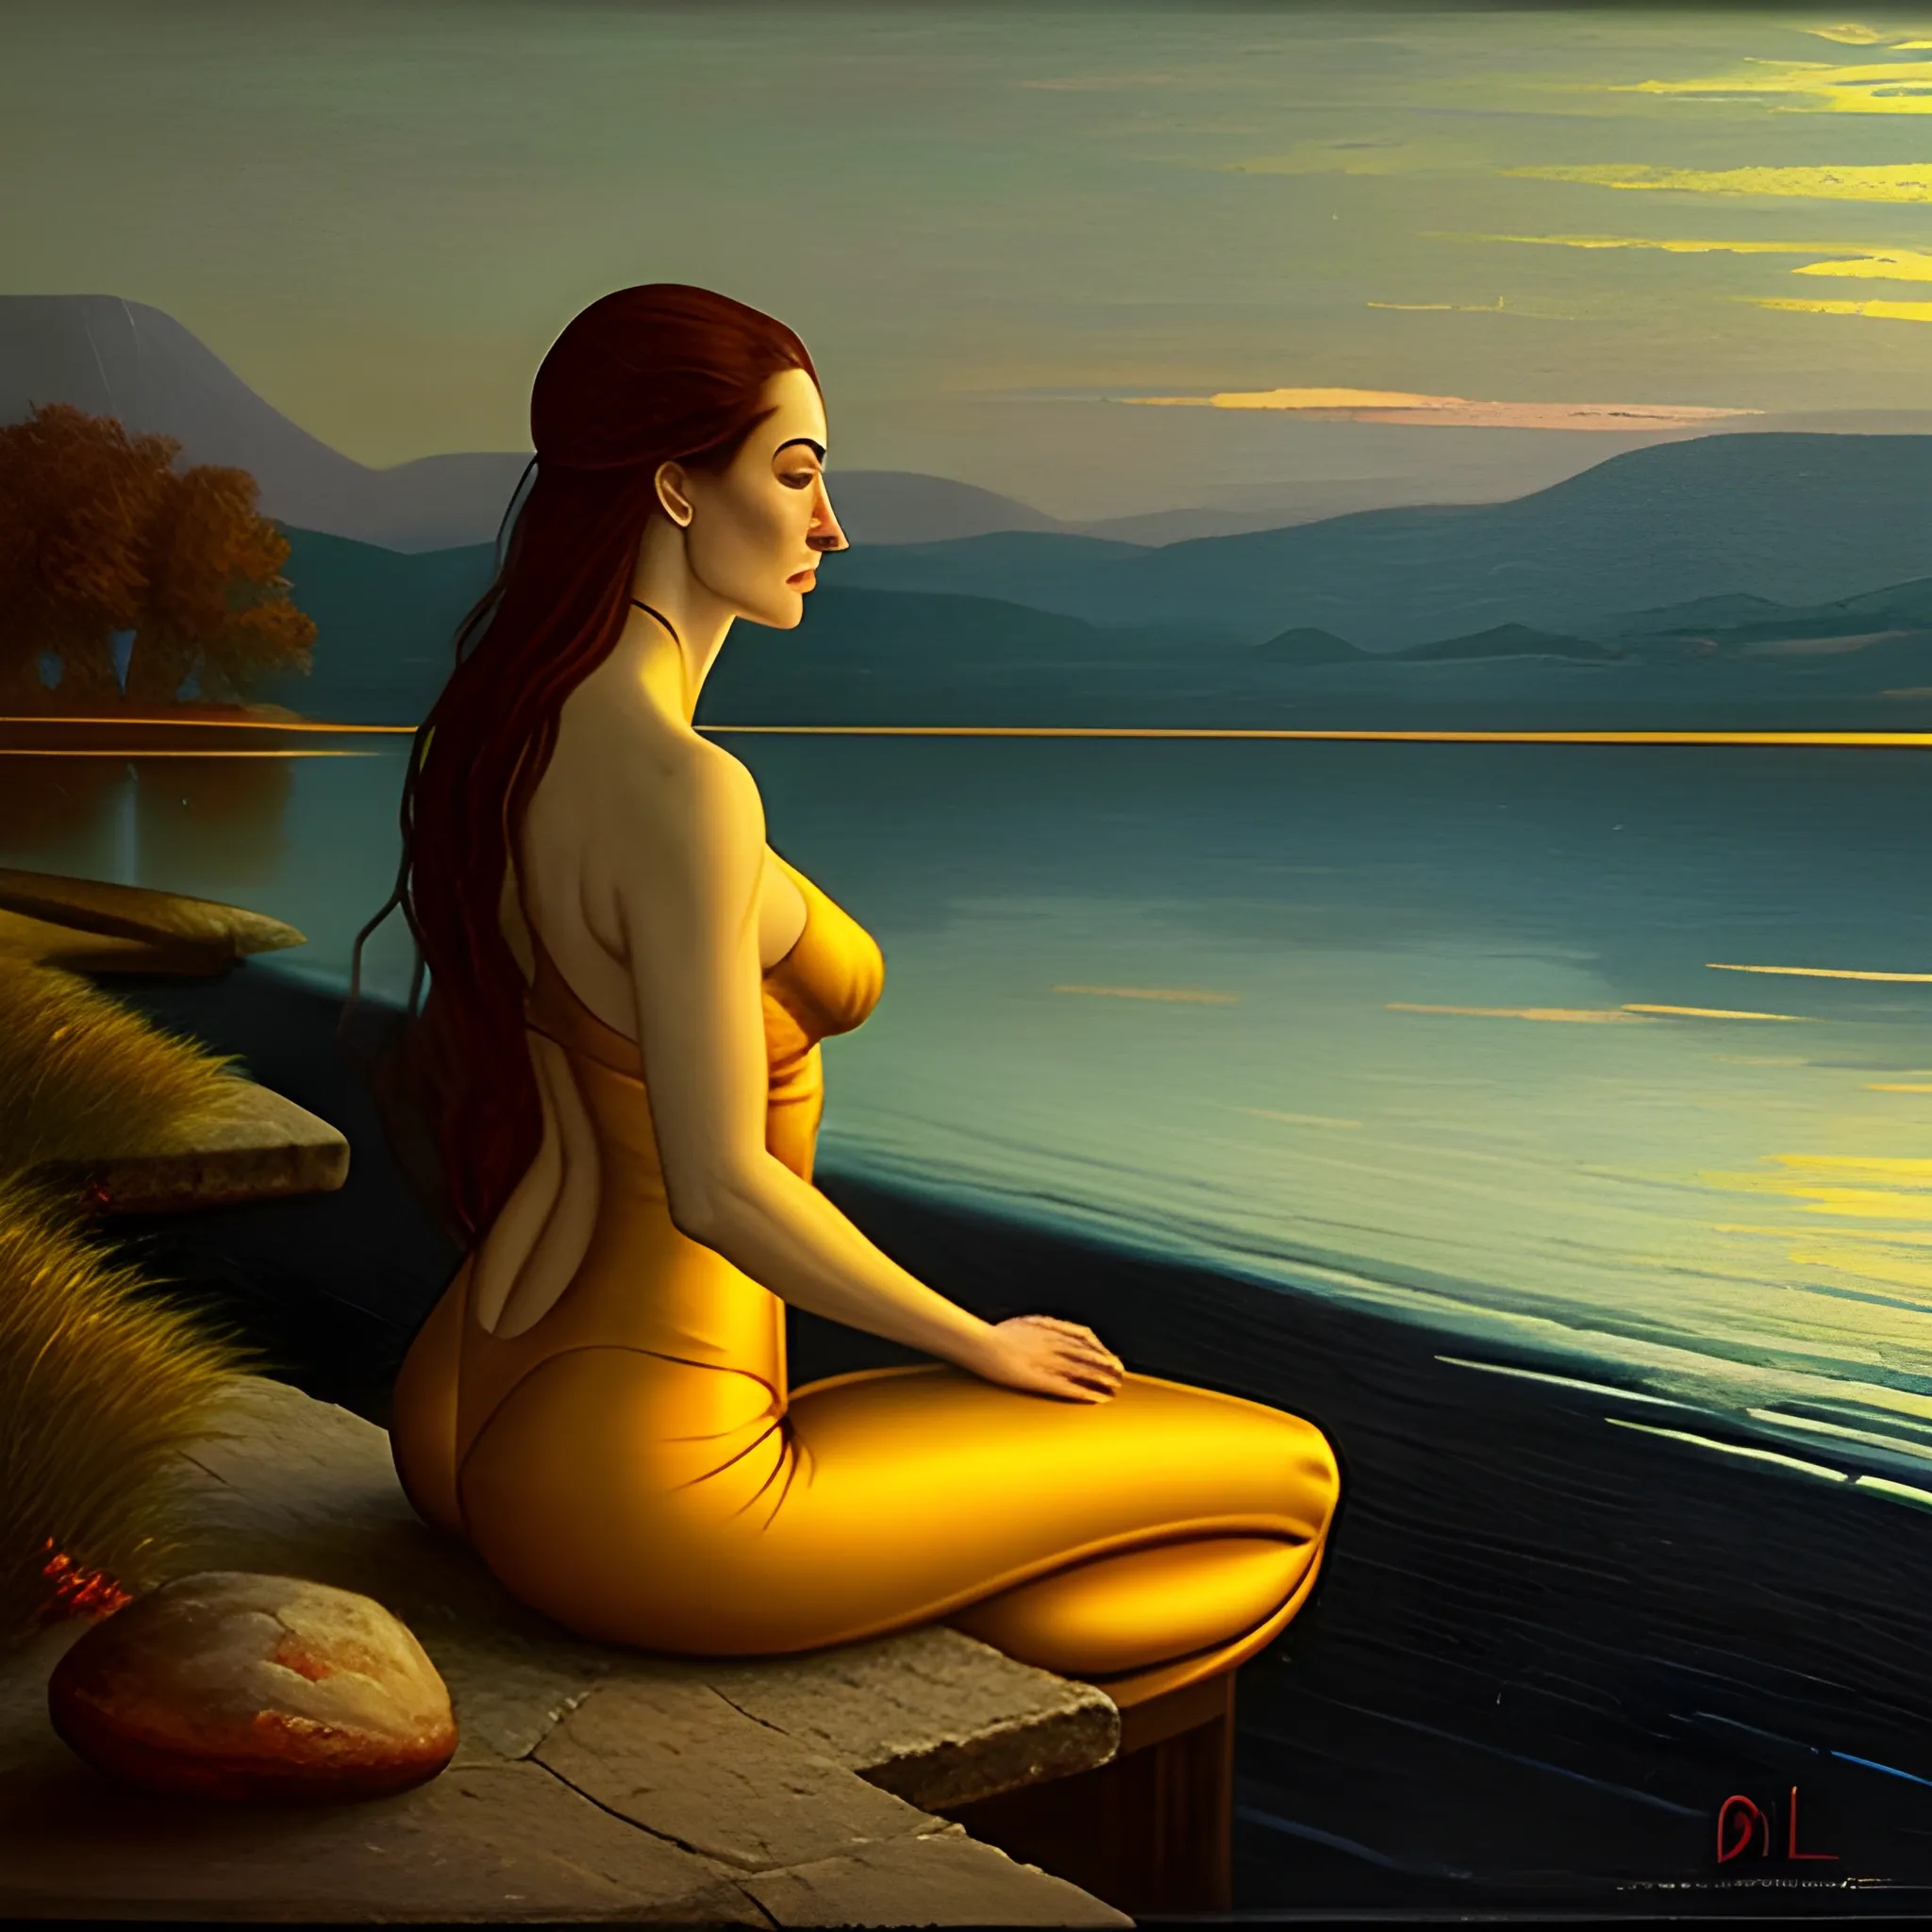 By the lakeside one evening, a lonely girl sits quietly by the shore, with the distant setting sun casting a golden afterglow reflected on the lake's surface. She embraces her knees, slightly leaning forward, in a contemplative posture, creating a somewhat melancholic atmosphere, simulating an oil painting effect in the style of Salvador Dali